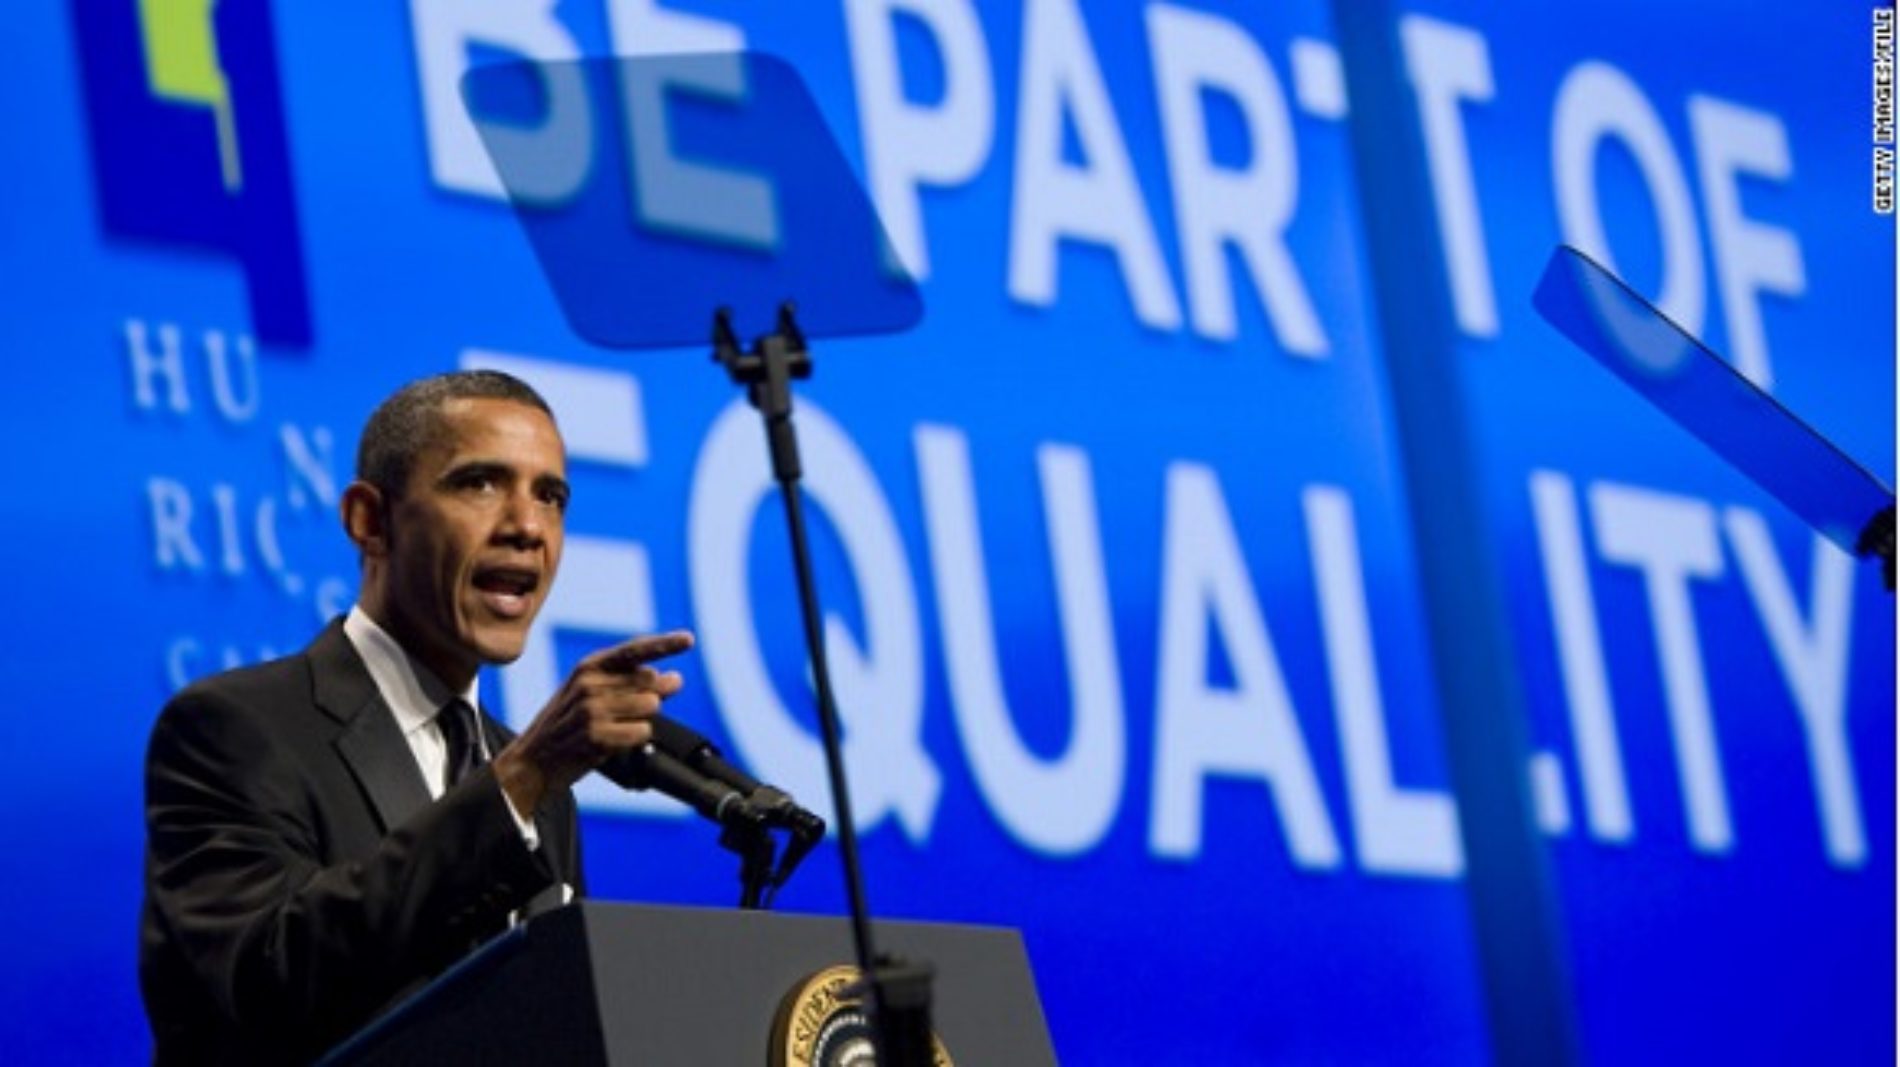 LGBT Leaders From Some Homophobic Nations Write Letter To President Obama